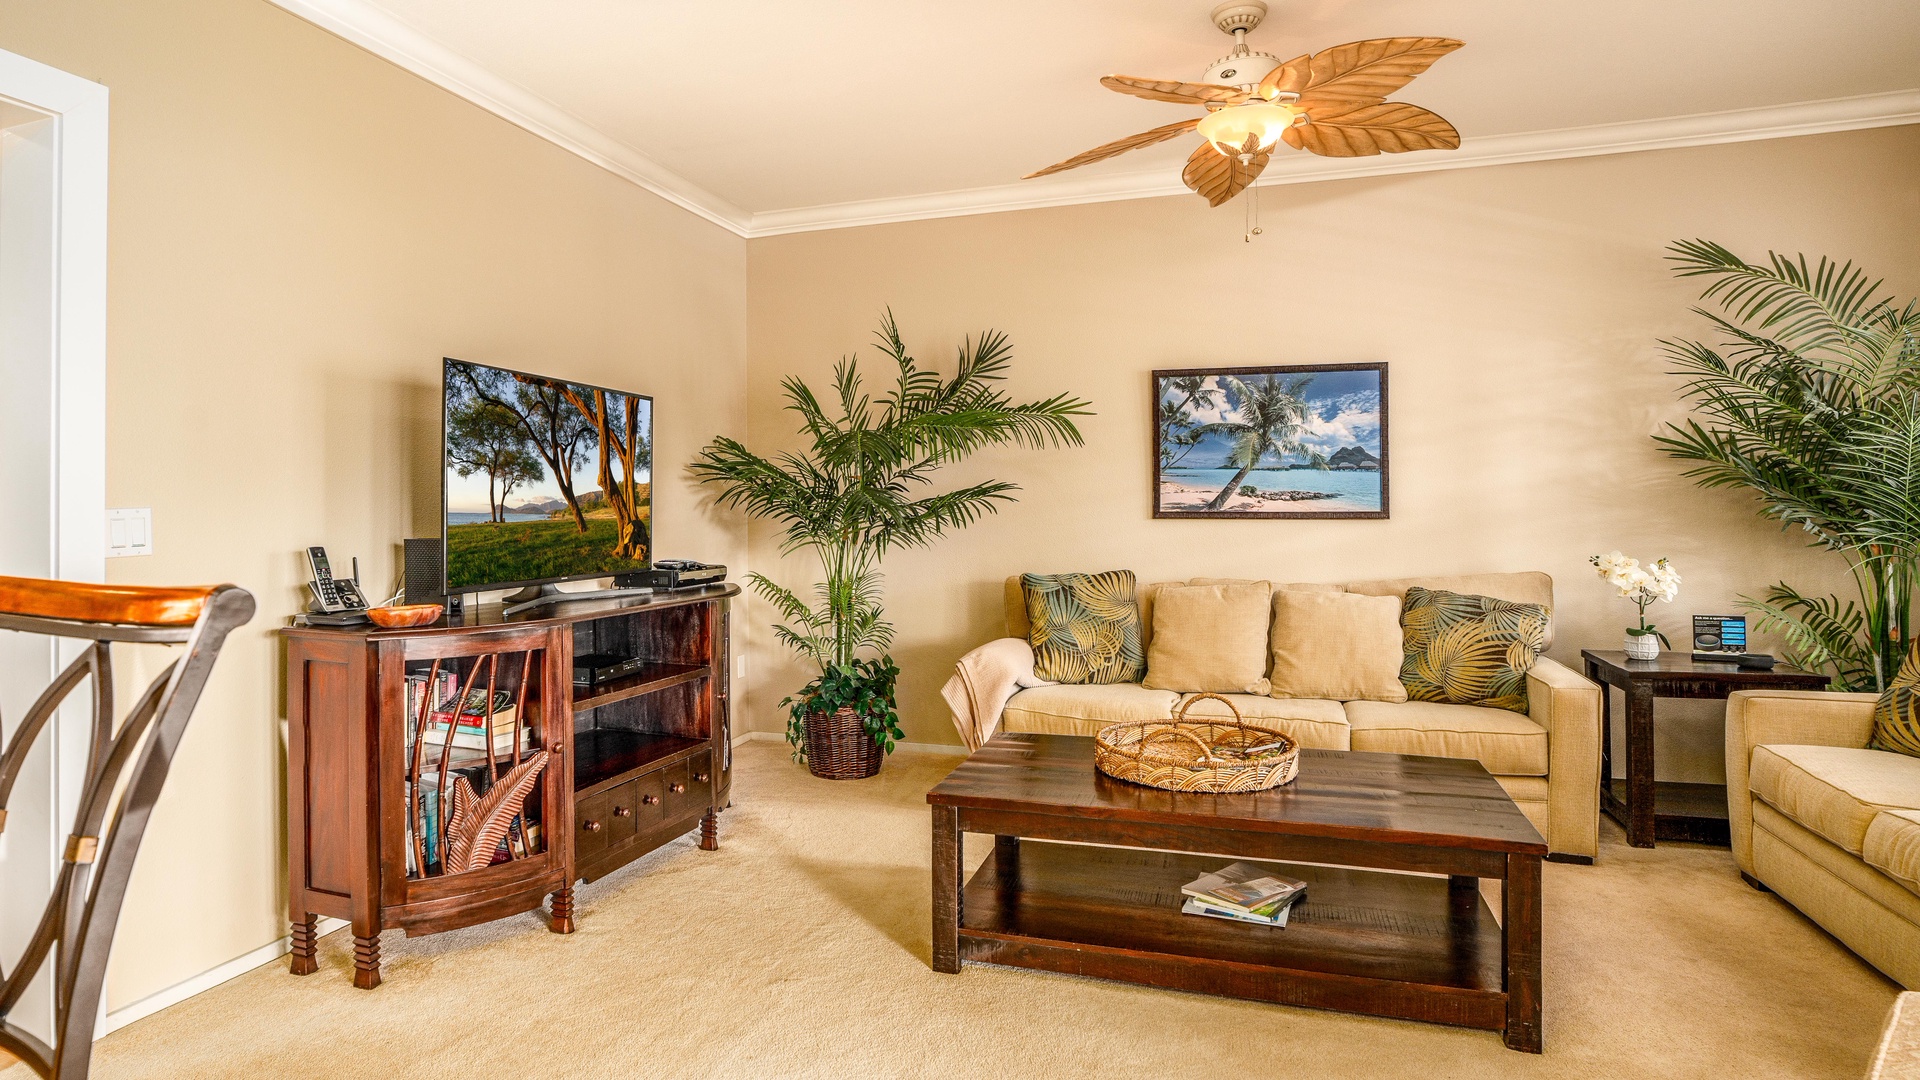 Kapolei Vacation Rentals, Coconut Plantation 1194-3 - Extra storage areas provided for your convenience.